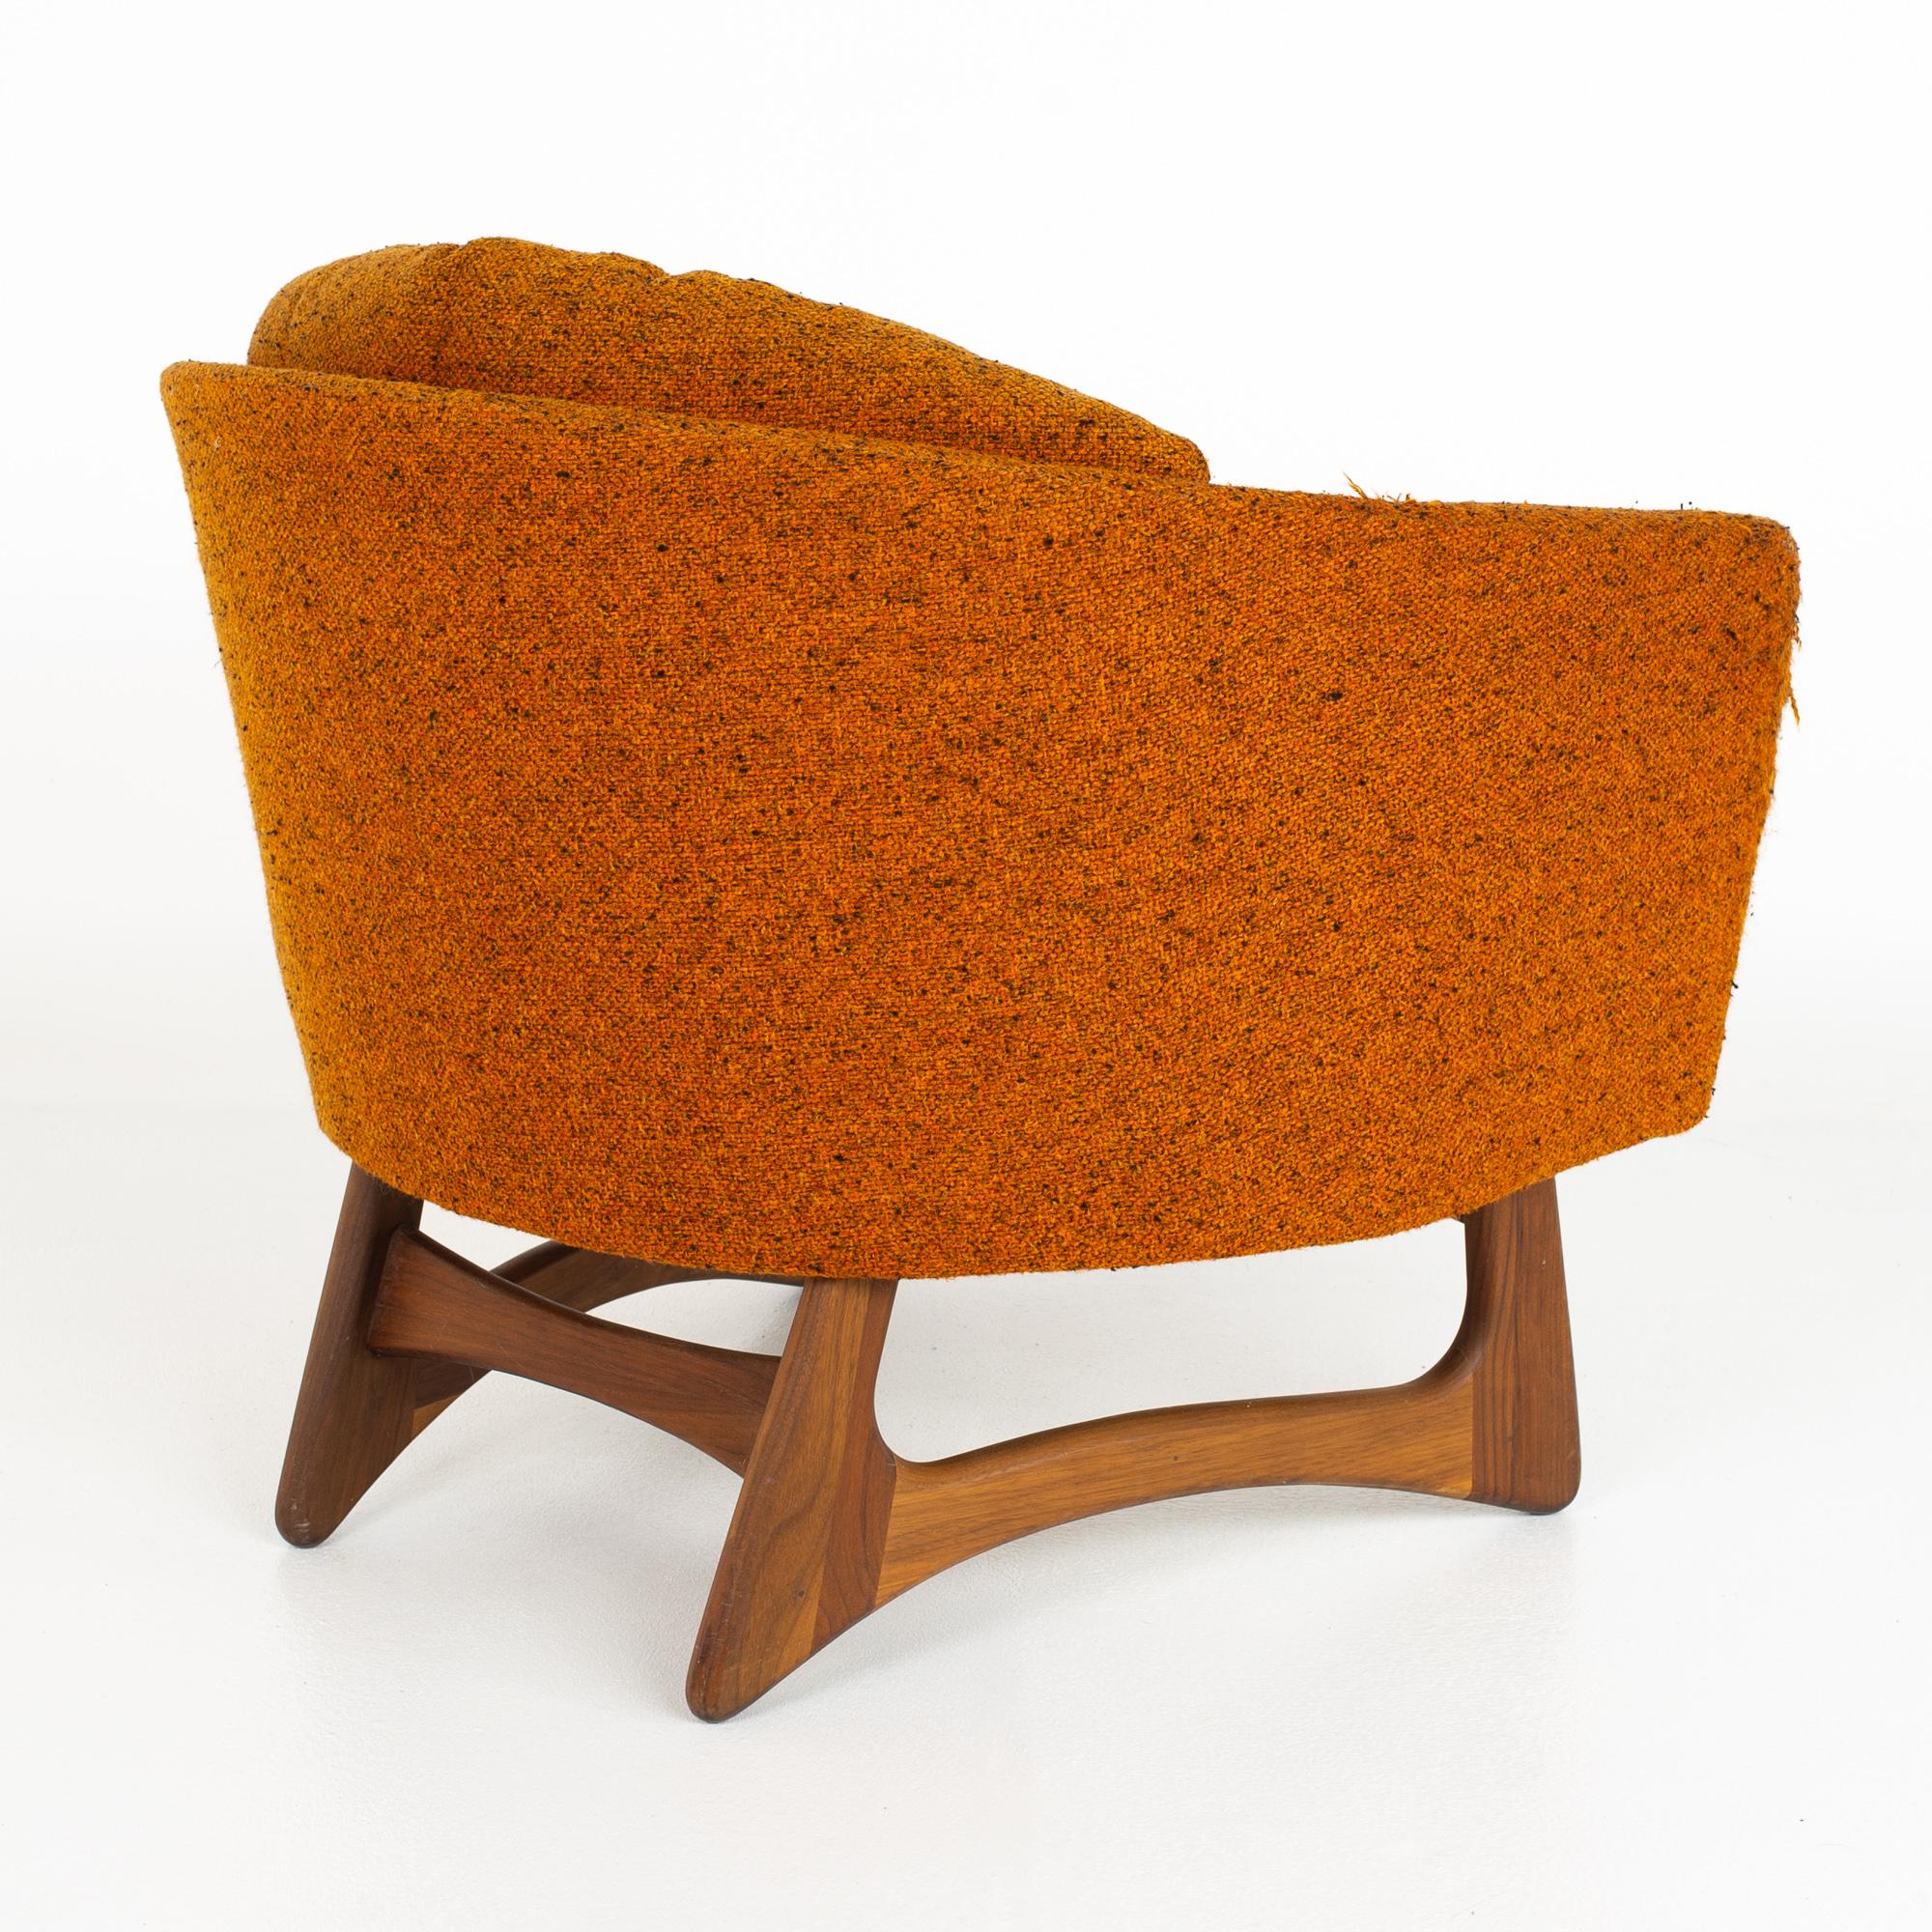 Upholstery Adrian Pearsall for Craft Associates Mid Century Walnut Barrel Lounge Chair 